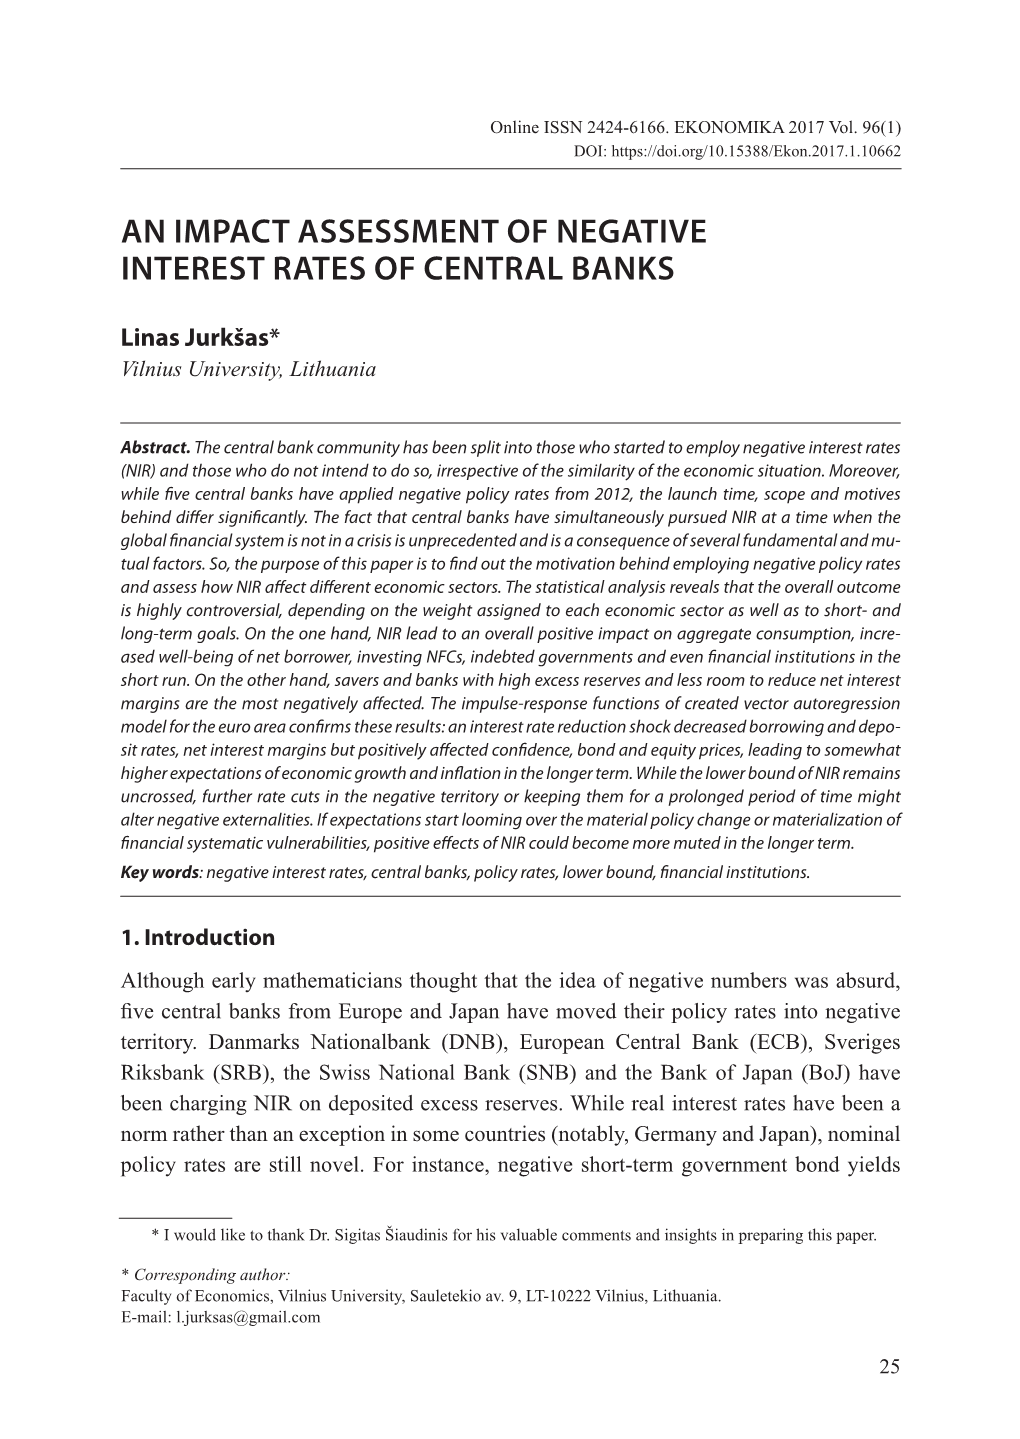 An Impact Assessment of Negative Interest Rates of Central Banks